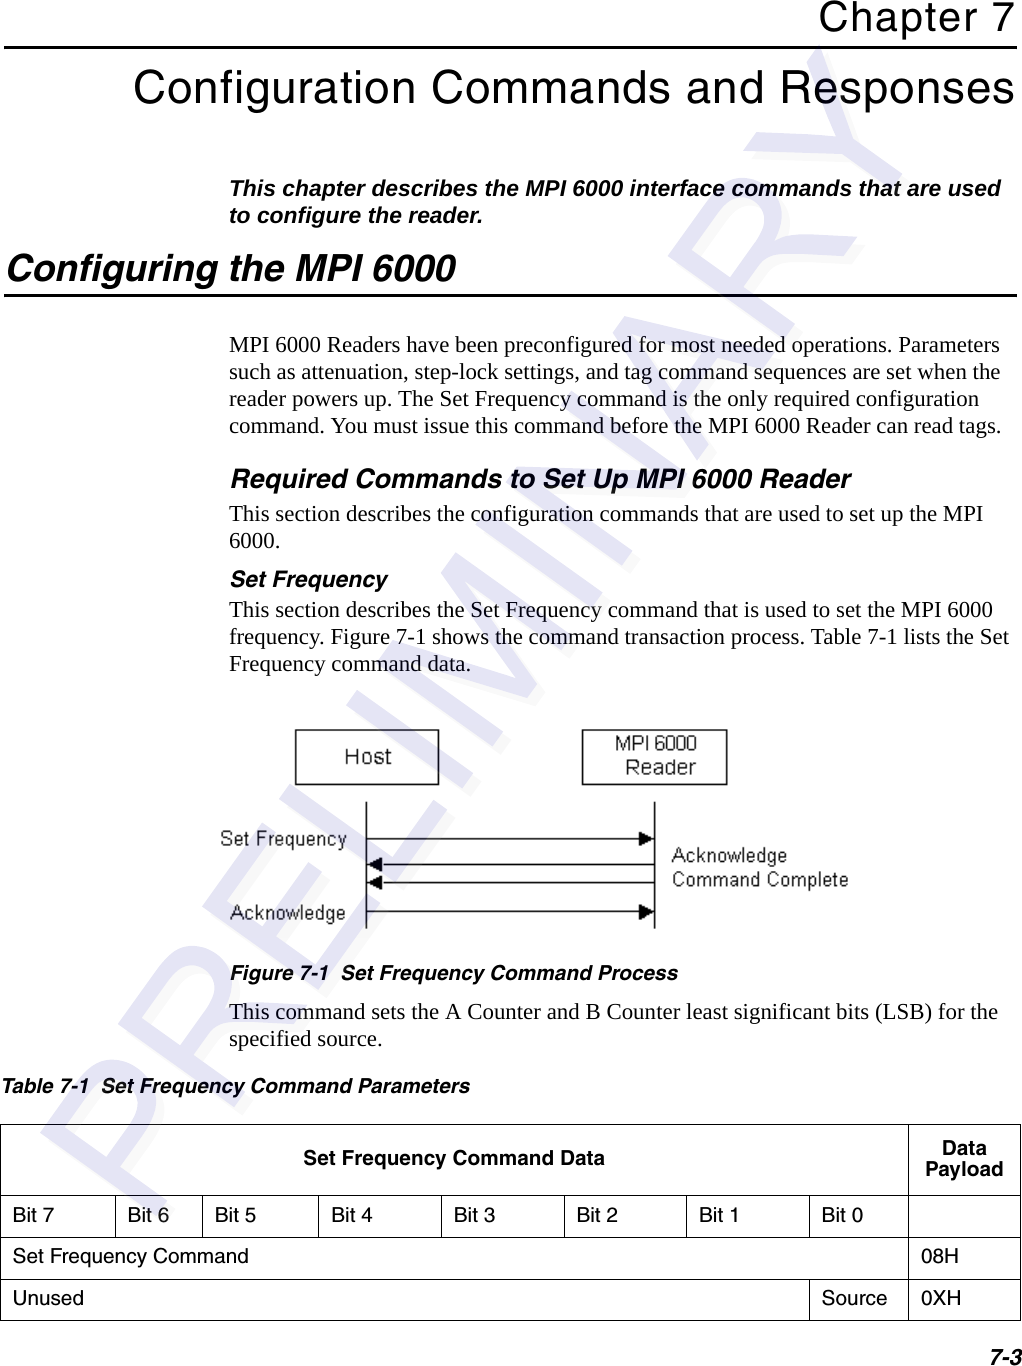 7-3Chapter 7Configuration Commands and ResponsesThis chapter describes the MPI 6000 interface commands that are used to configure the reader.Configuring the MPI 6000MPI 6000 Readers have been preconfigured for most needed operations. Parameters such as attenuation, step-lock settings, and tag command sequences are set when the reader powers up. The Set Frequency command is the only required configuration command. You must issue this command before the MPI 6000 Reader can read tags.Required Commands to Set Up MPI 6000 ReaderThis section describes the configuration commands that are used to set up the MPI 6000.Set FrequencyThis section describes the Set Frequency command that is used to set the MPI 6000 frequency. Figure 7-1 shows the command transaction process. Table 7-1 lists the Set Frequency command data.Figure 7-1  Set Frequency Command ProcessThis command sets the A Counter and B Counter least significant bits (LSB) for the specified source.Table 7-1  Set Frequency Command ParametersSet Frequency Command Data Data PayloadBit 7 Bit 6 Bit 5 Bit 4 Bit 3 Bit 2 Bit 1 Bit 0Set Frequency Command 08HUnused Source 0XH